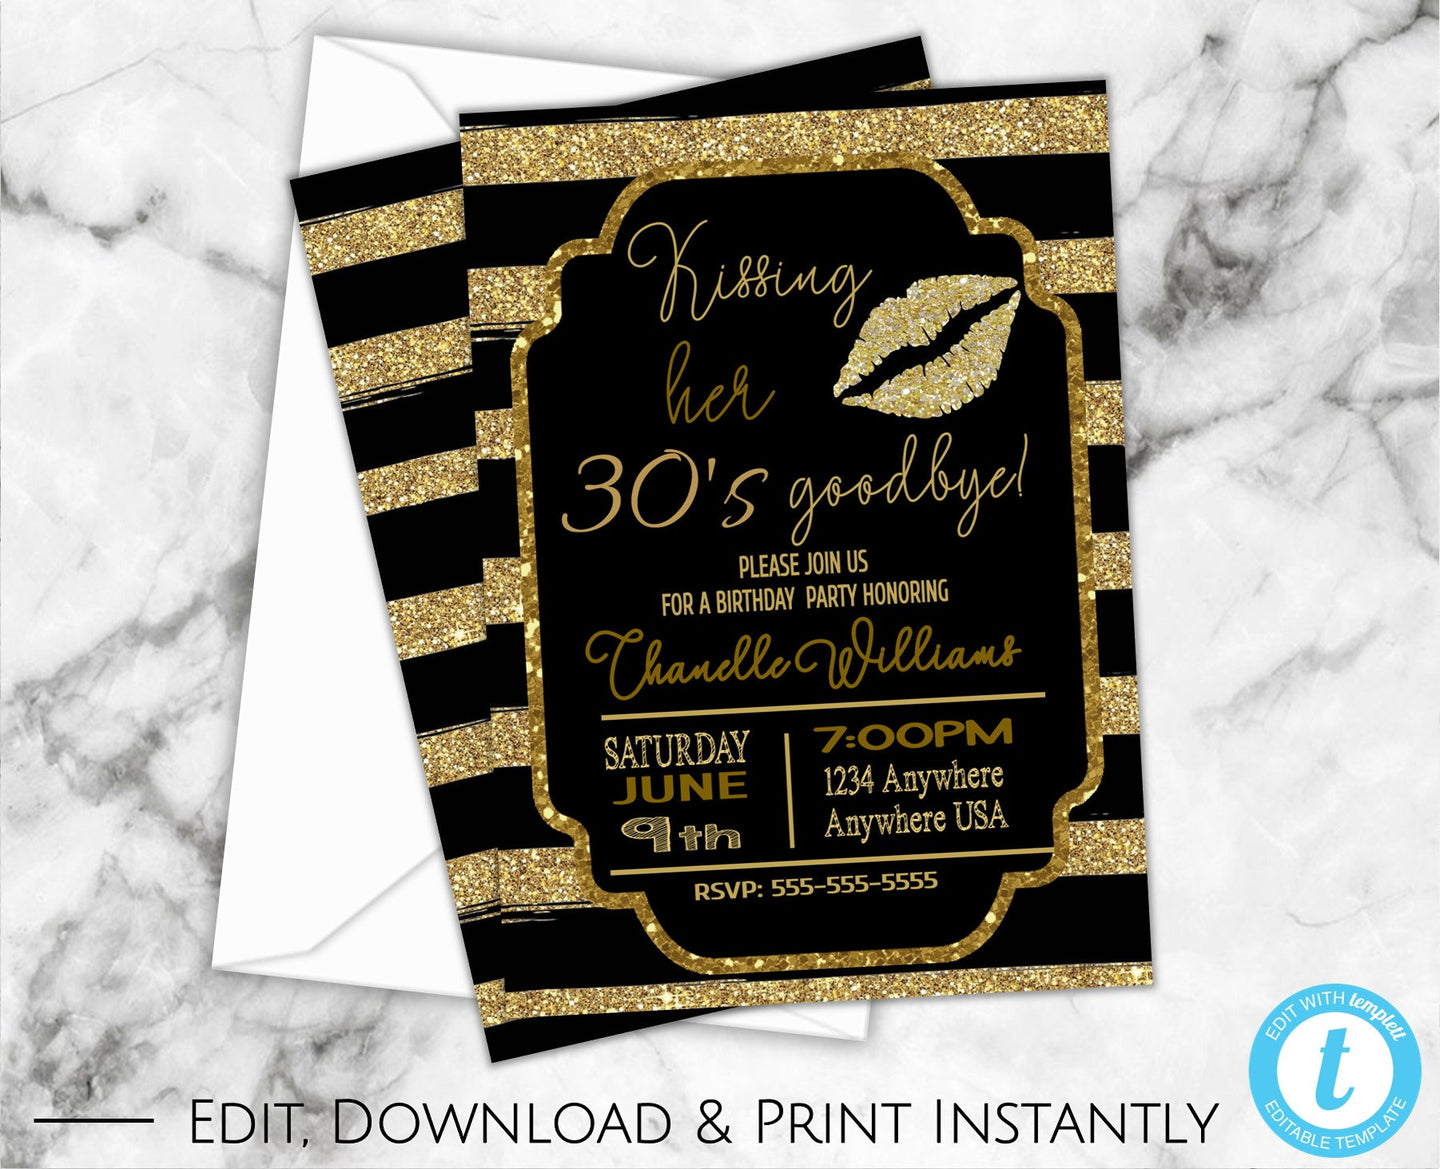 40th Birthday Party Invitations, 40th Birthday Invites, 40th Birthday, Birthday Invitations, Birthday Invitation Template, Black and Gold